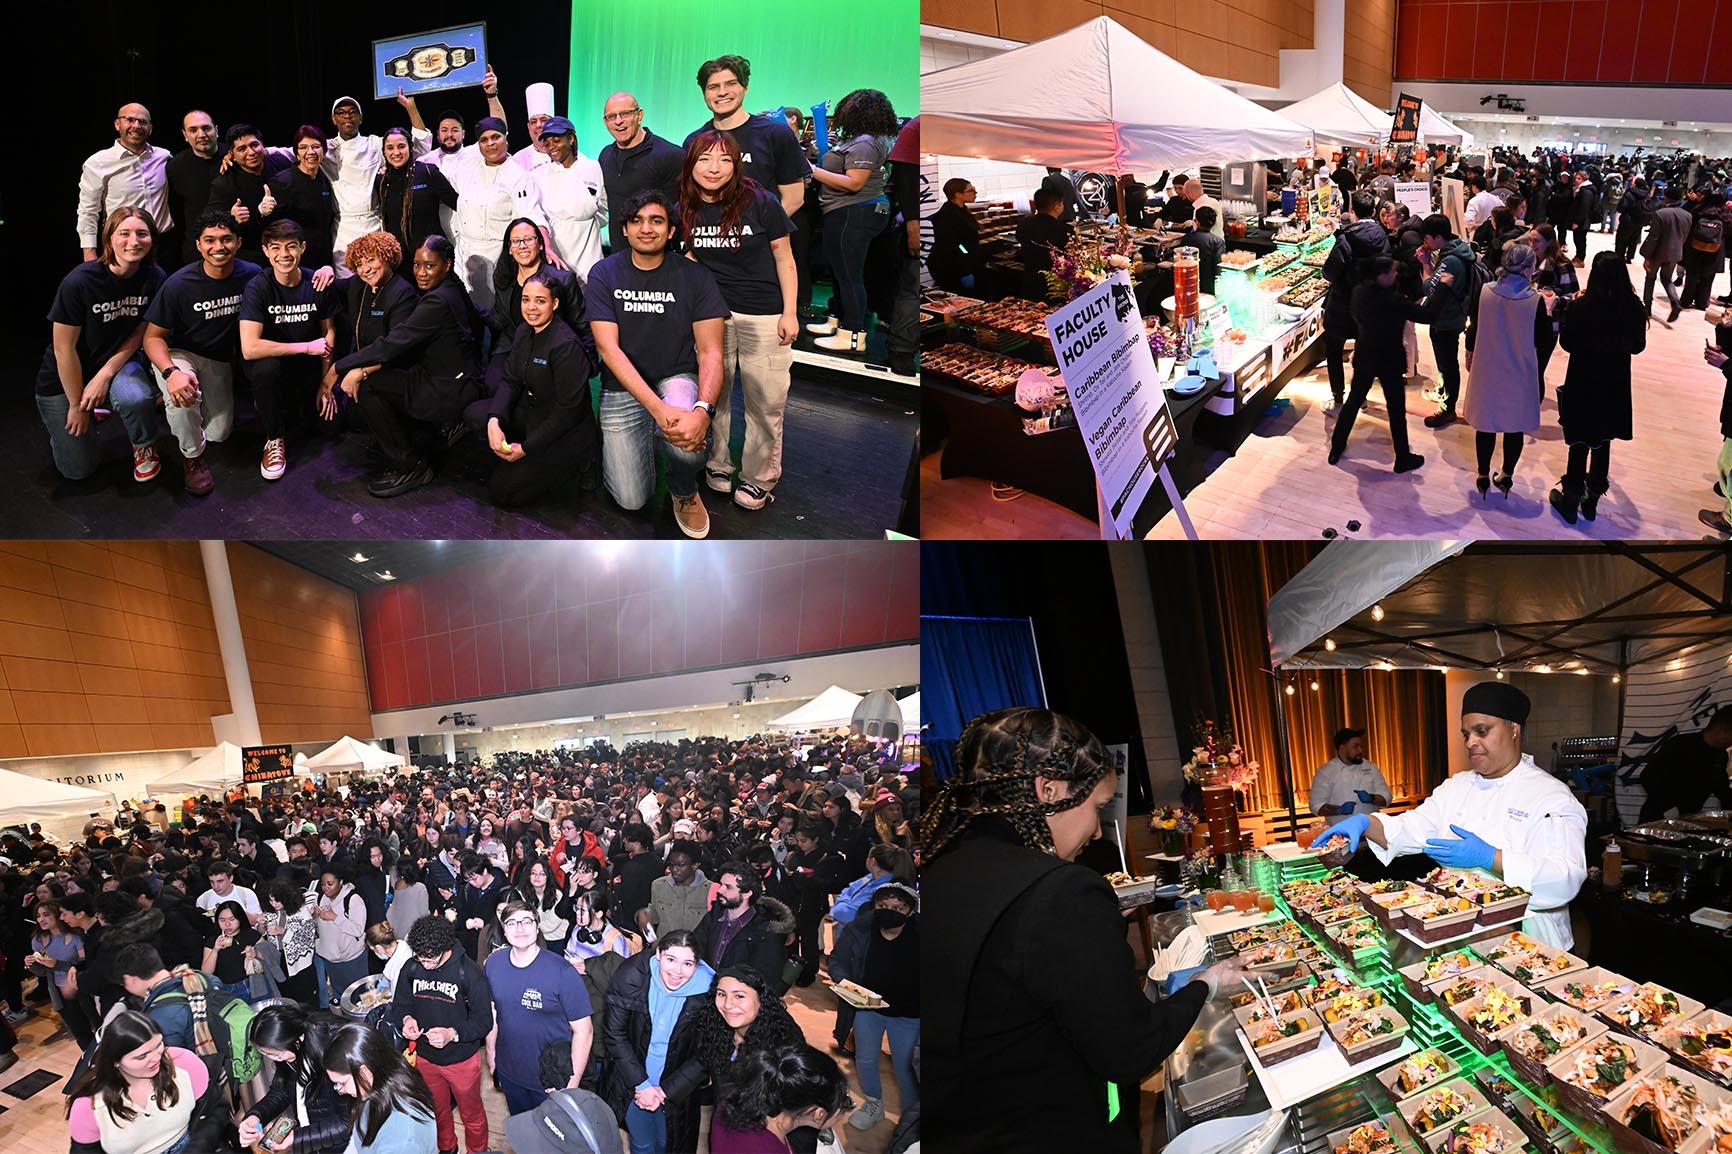 Collage of 4 photos from 2023 Battle of the Dining Halls: Top left photo of the 2023 winners on stage at the event, bottom left photo of Lerner Hall filled with students from the events, top right photo of students sampling food at the event, bottom right Columbia Dining staff and students at the event